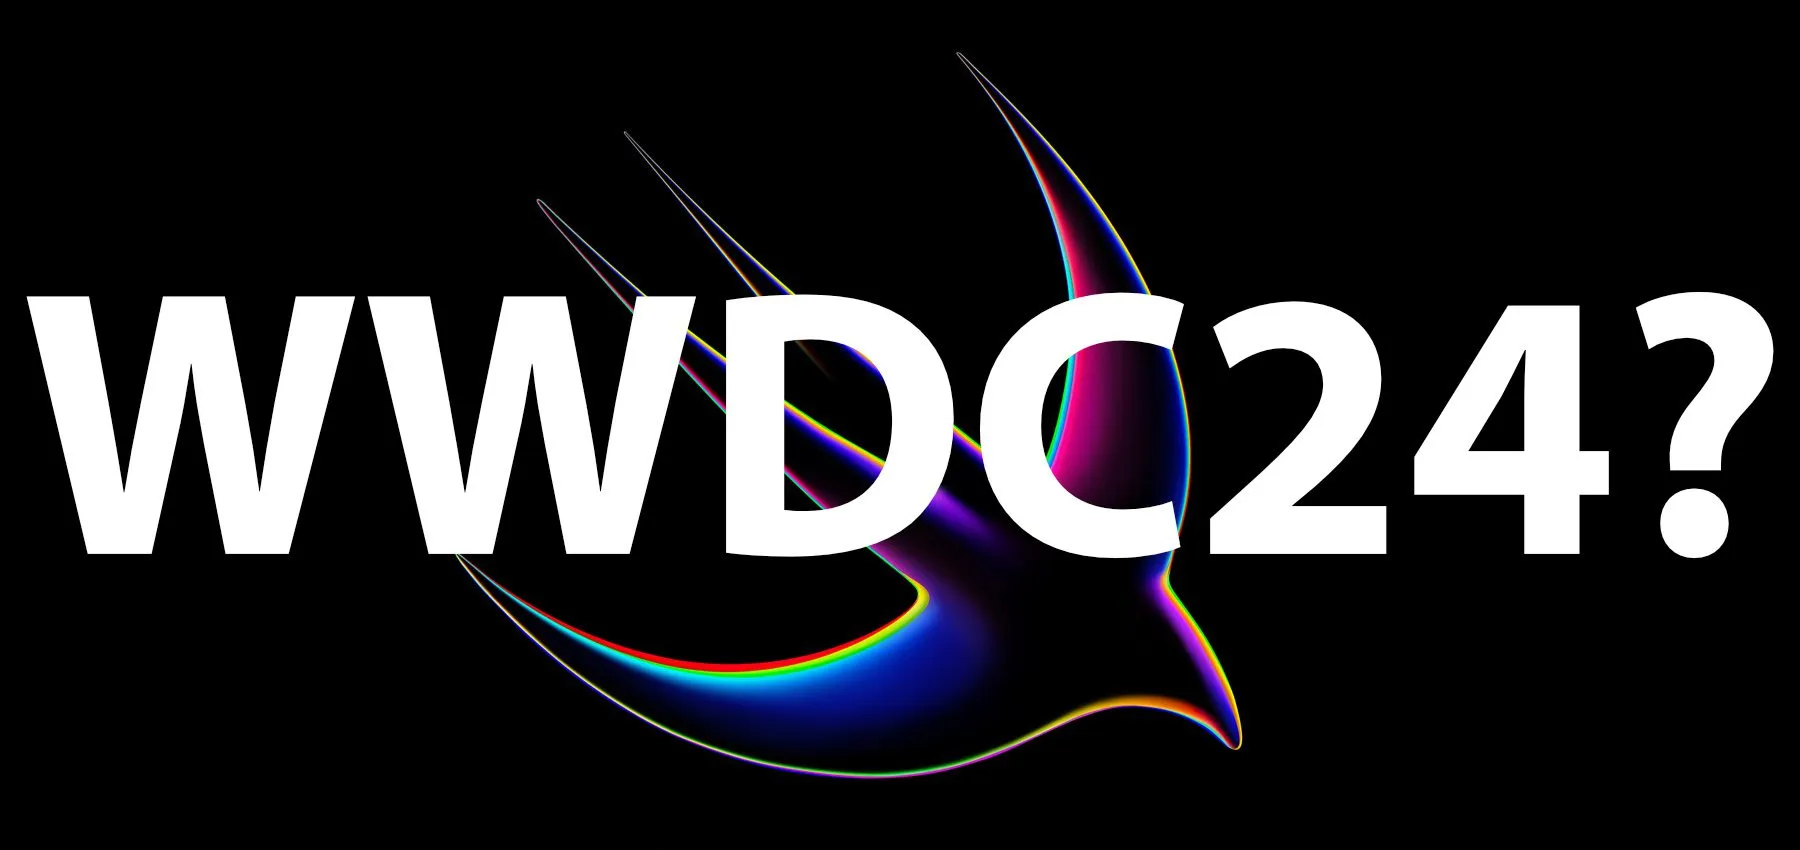 Fictional poster for WWDC 24